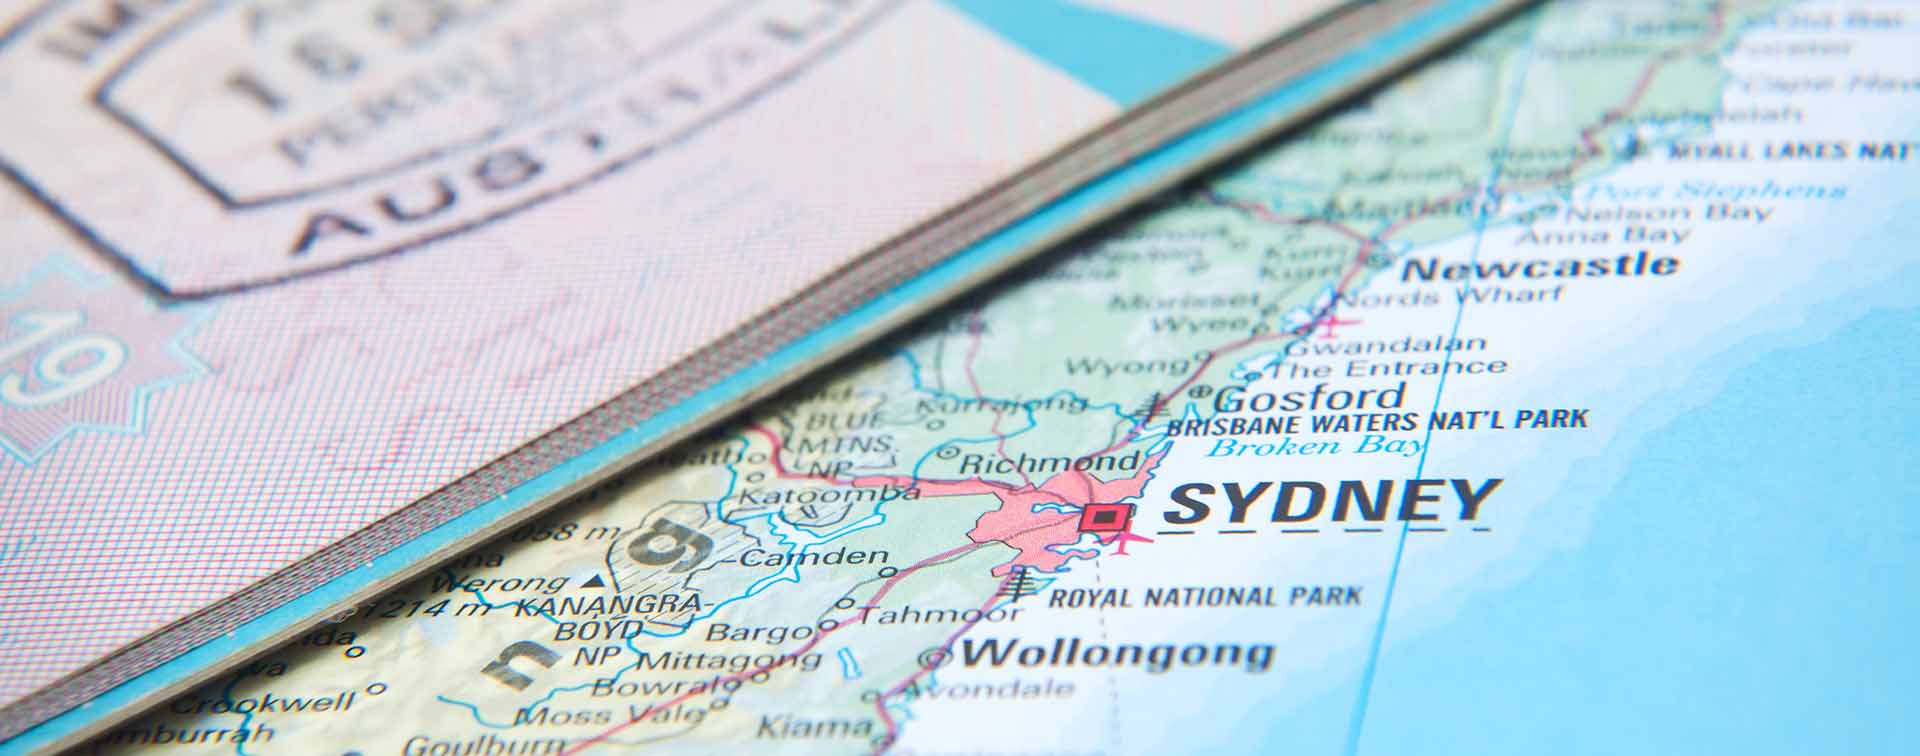 Extreme close-up of a map of Australia showing Sydney and a partial Australian passport lying over it.